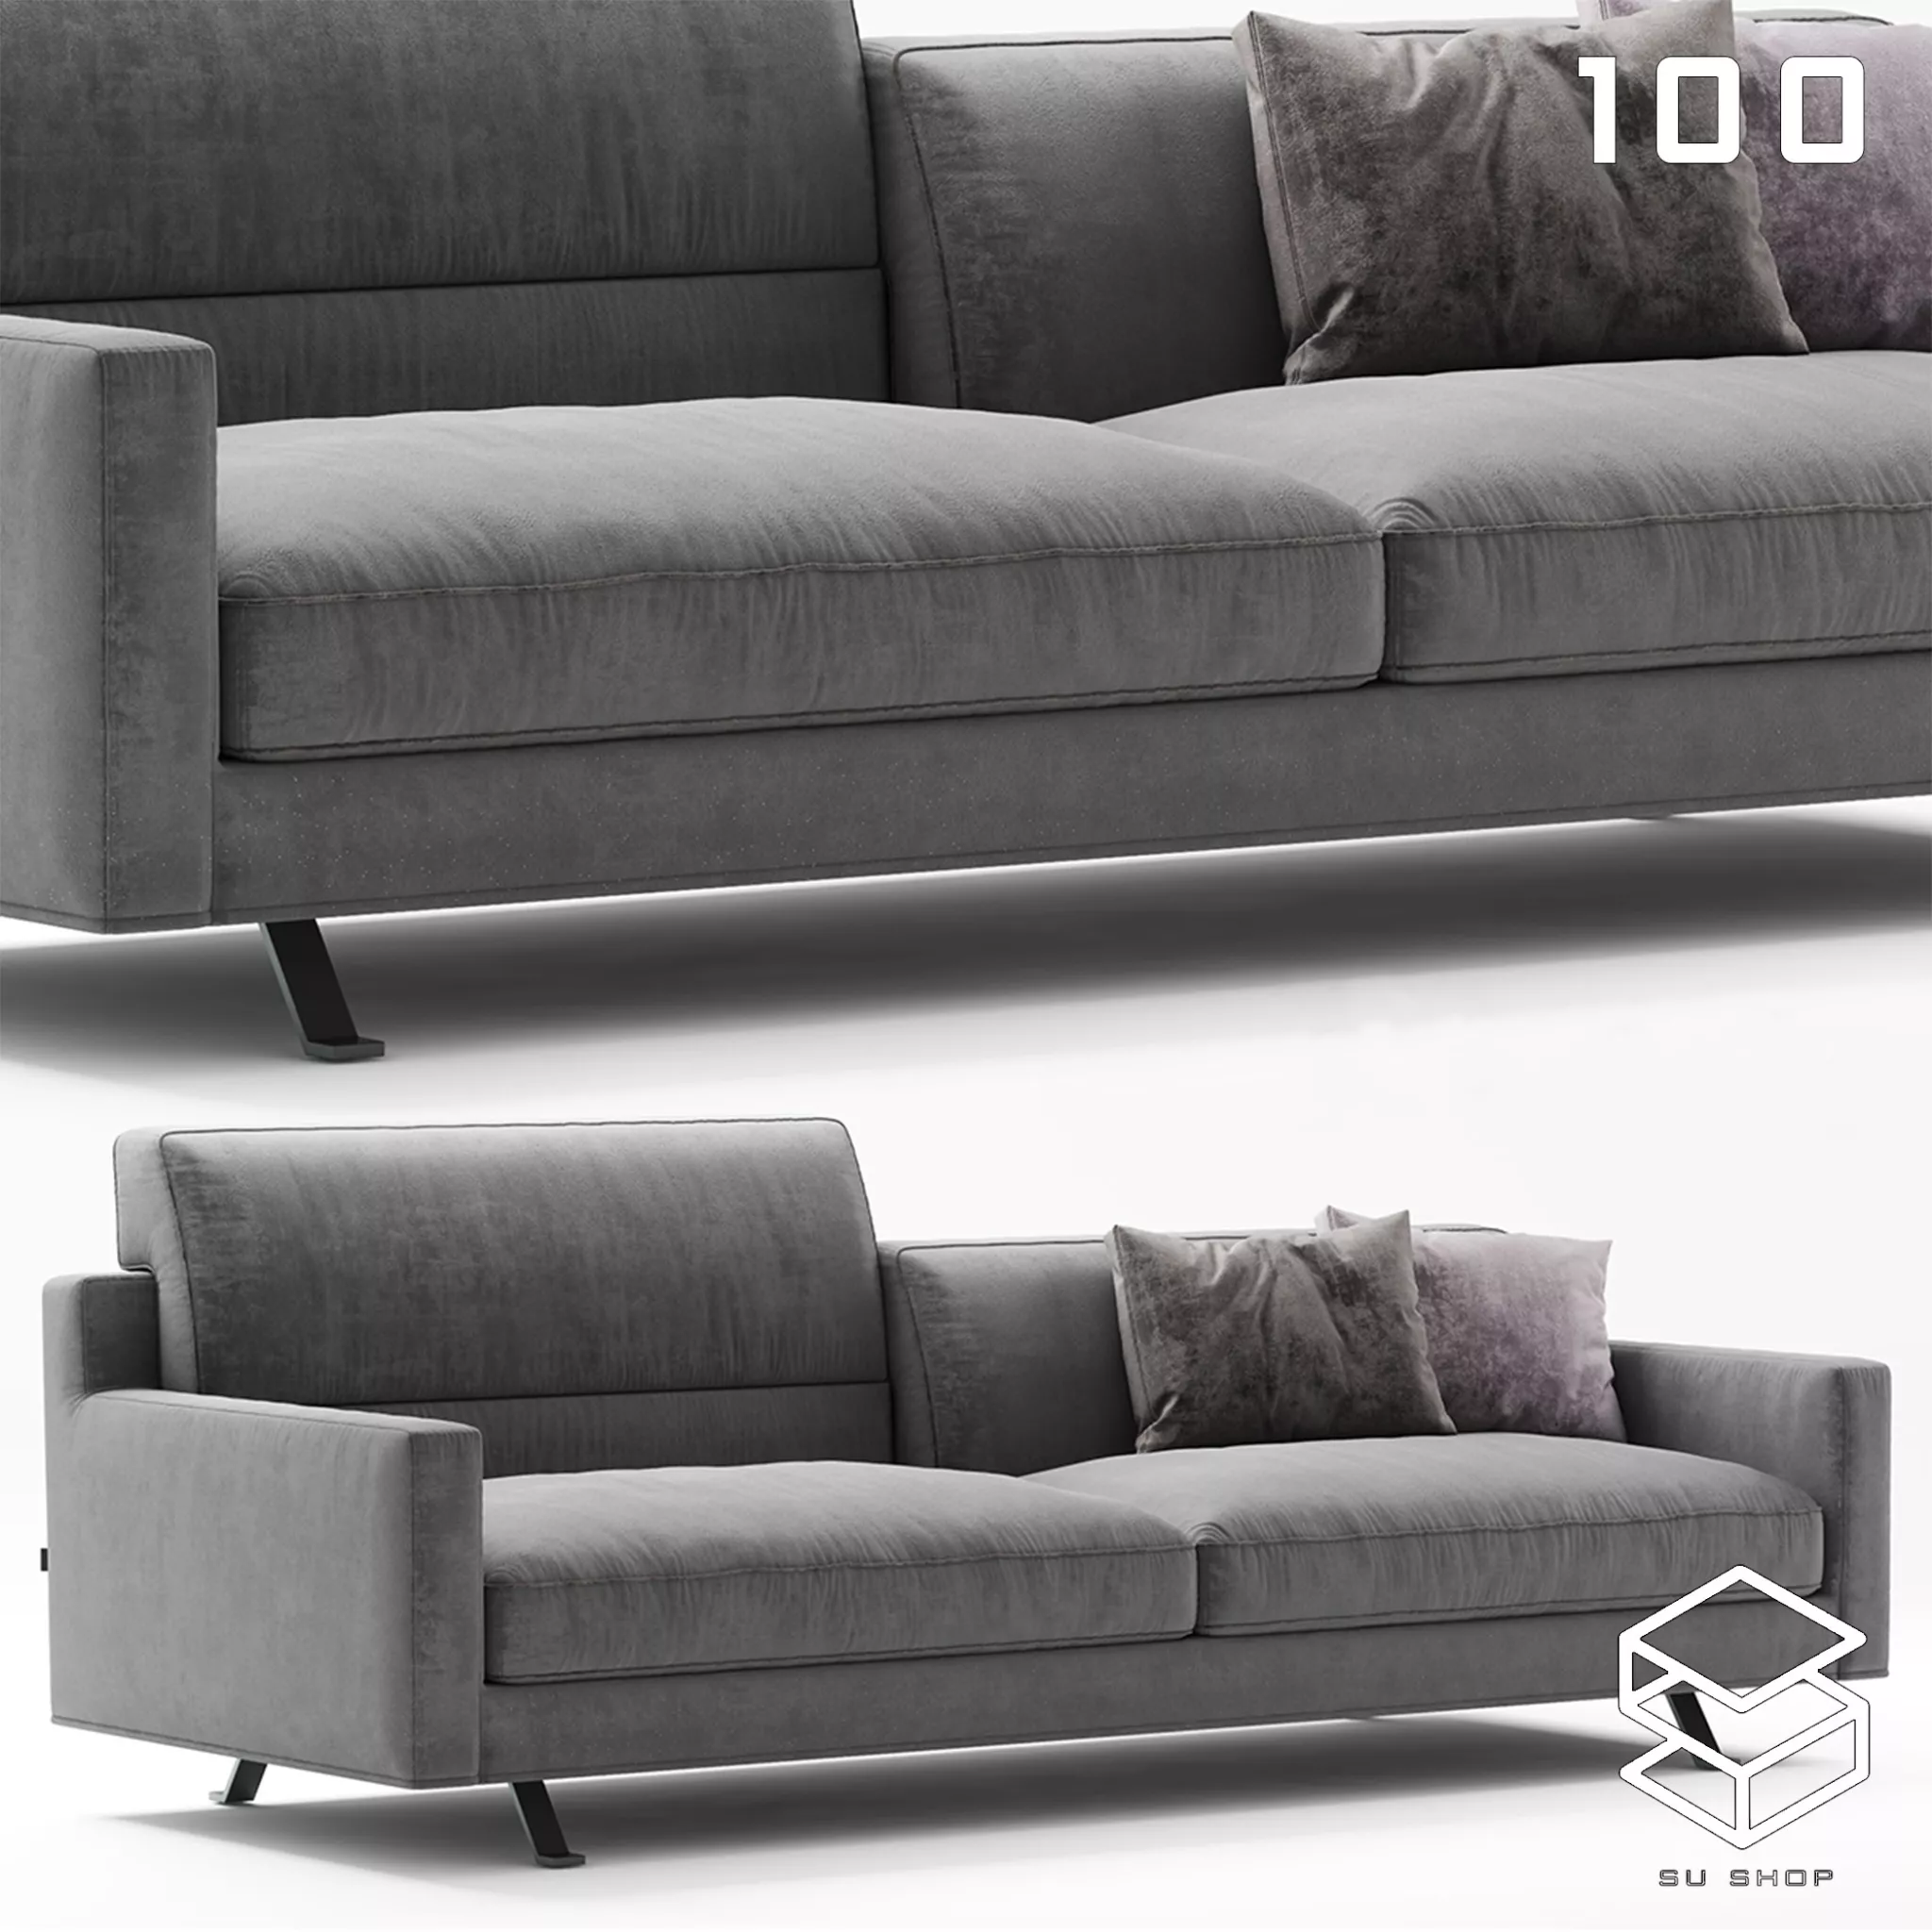 MODERN SOFA - SKETCHUP 3D MODEL - VRAY OR ENSCAPE - ID13387